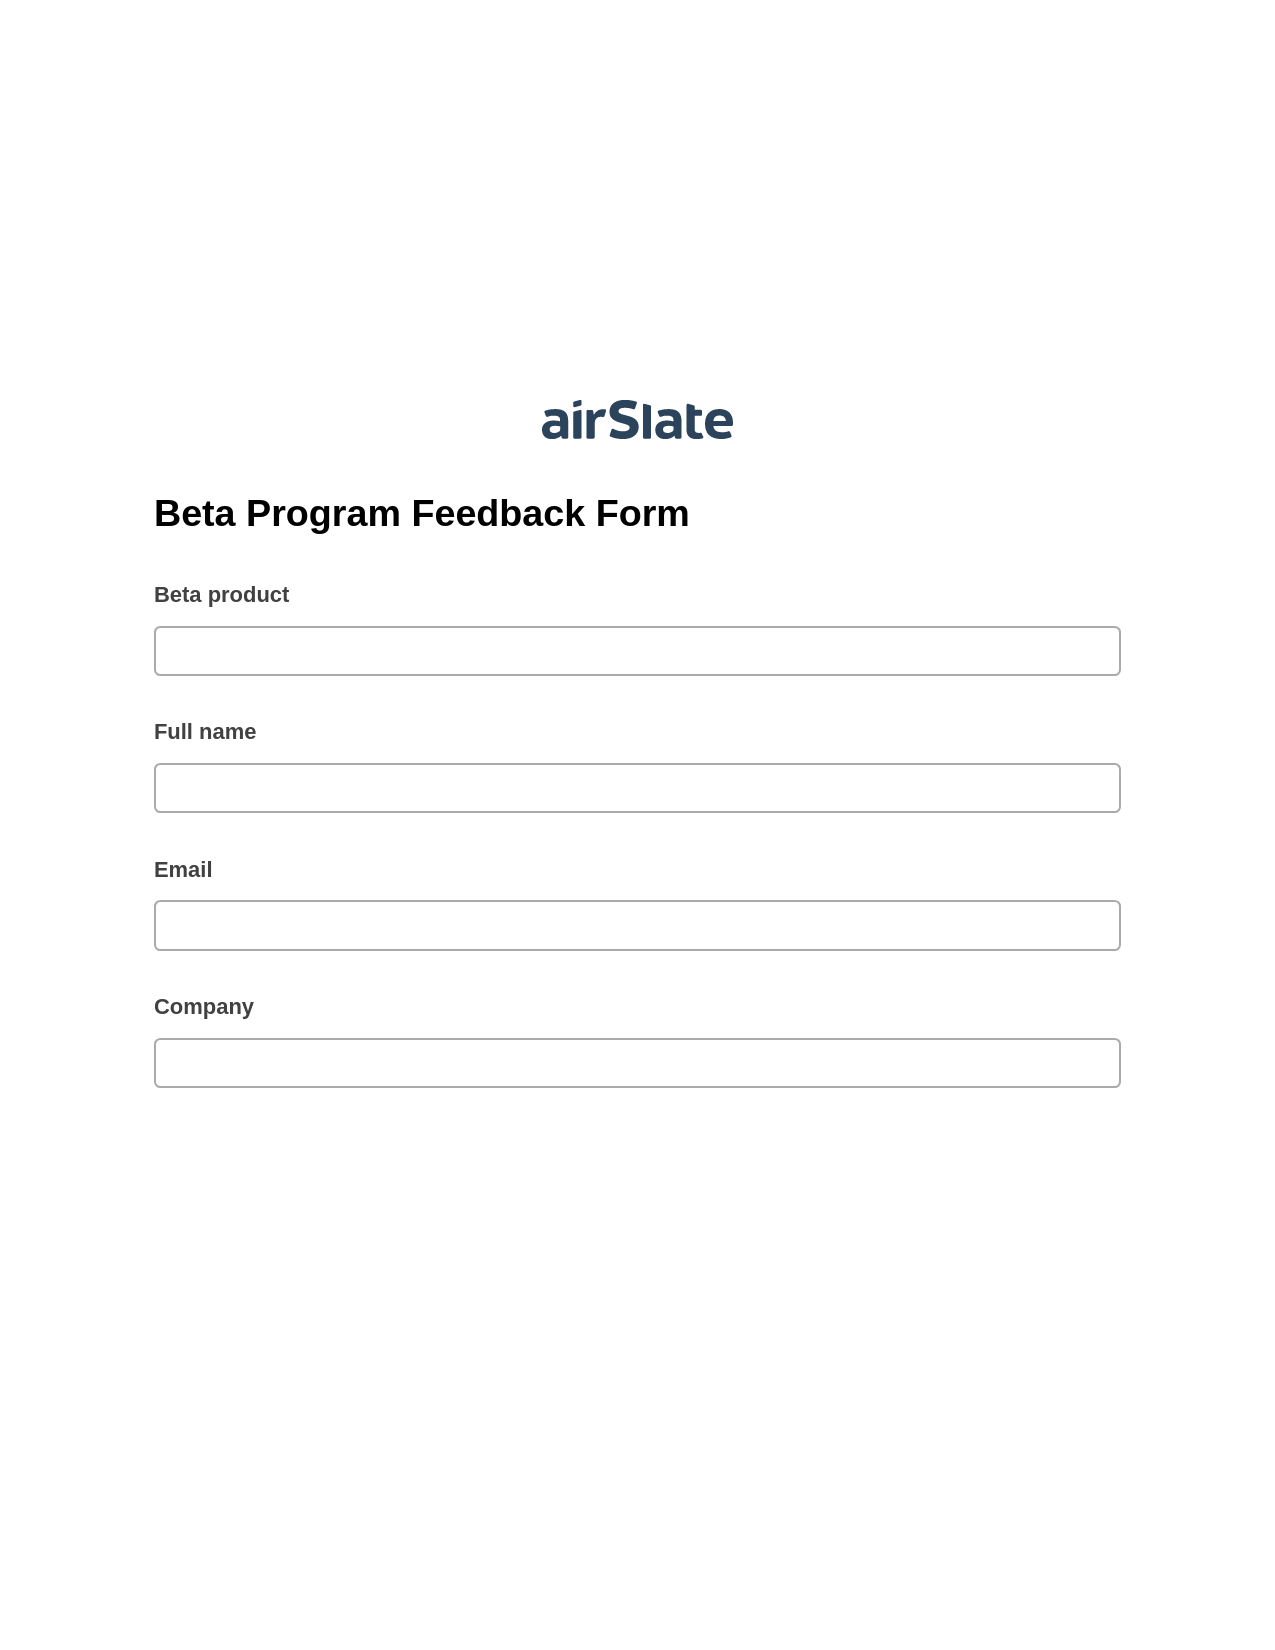 Beta Program Feedback Form Pre-fill Dropdowns from Excel Bot, Webhook Bot, Export to Excel 365 Bot